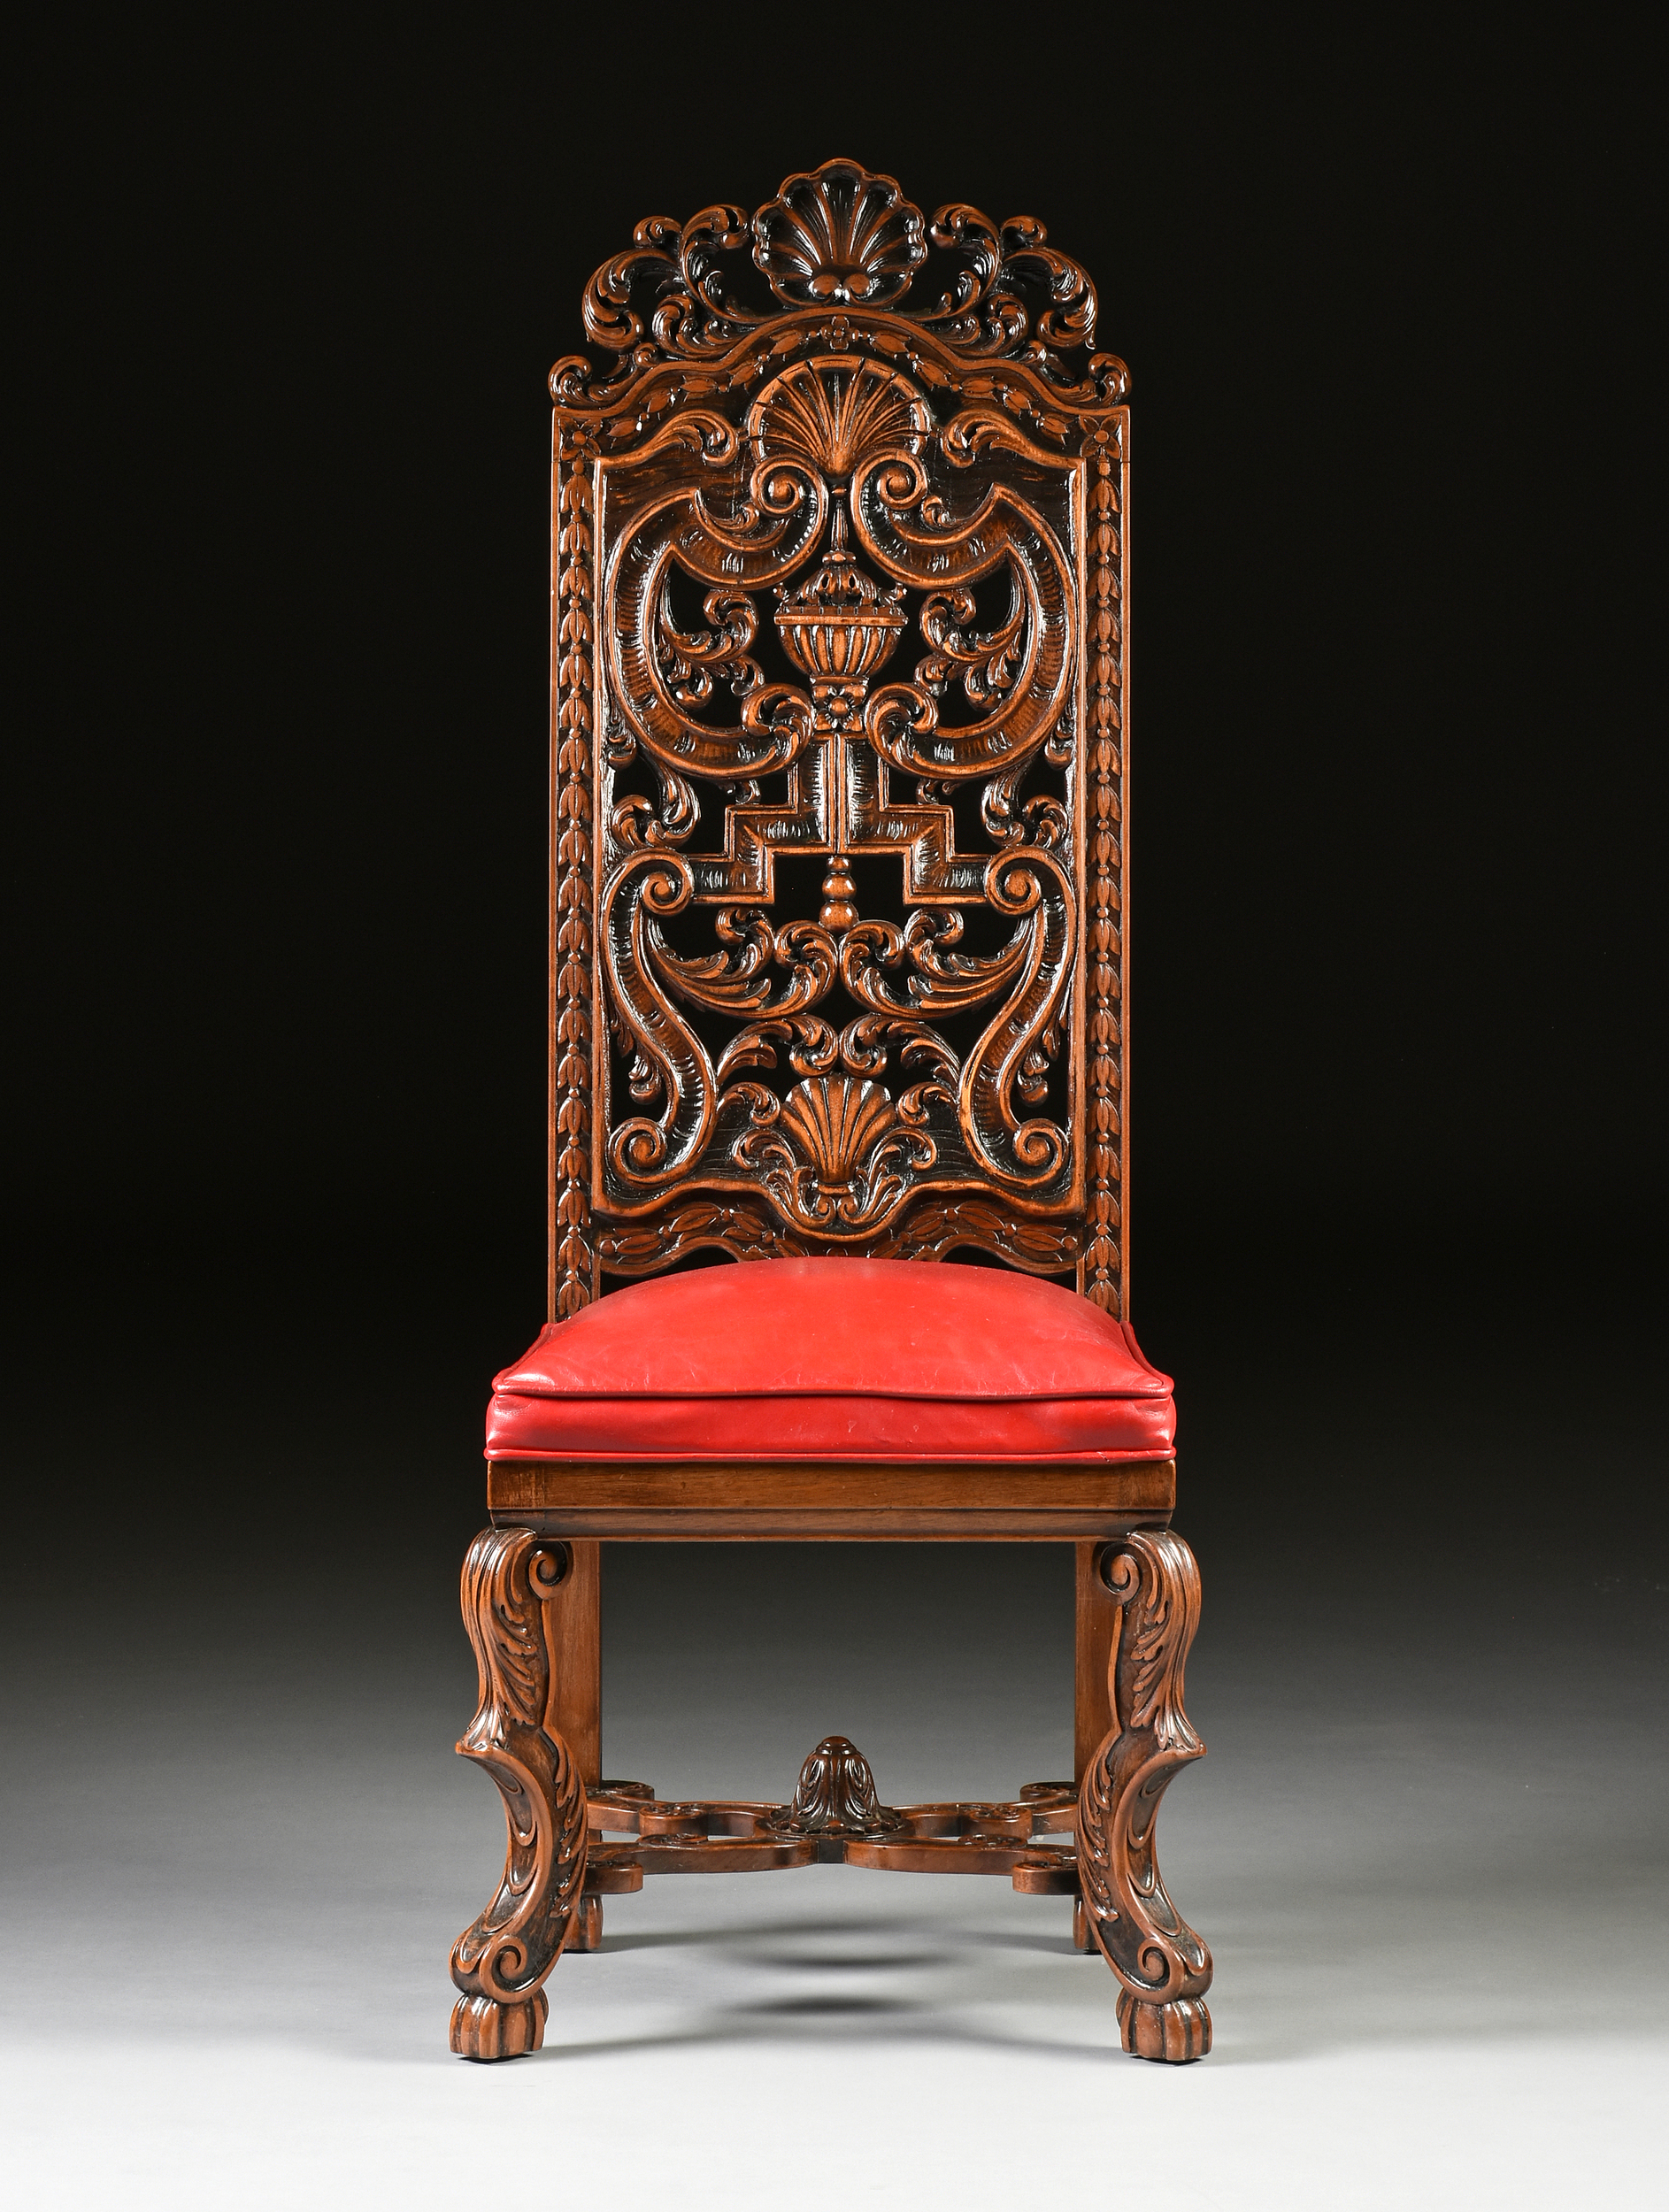 A CHARLES II STYLE CARVED WALNUT AND RED LEATHER UPHOLSTERED SIDE CHAIR, LATE 19TH/EARLY 20TH